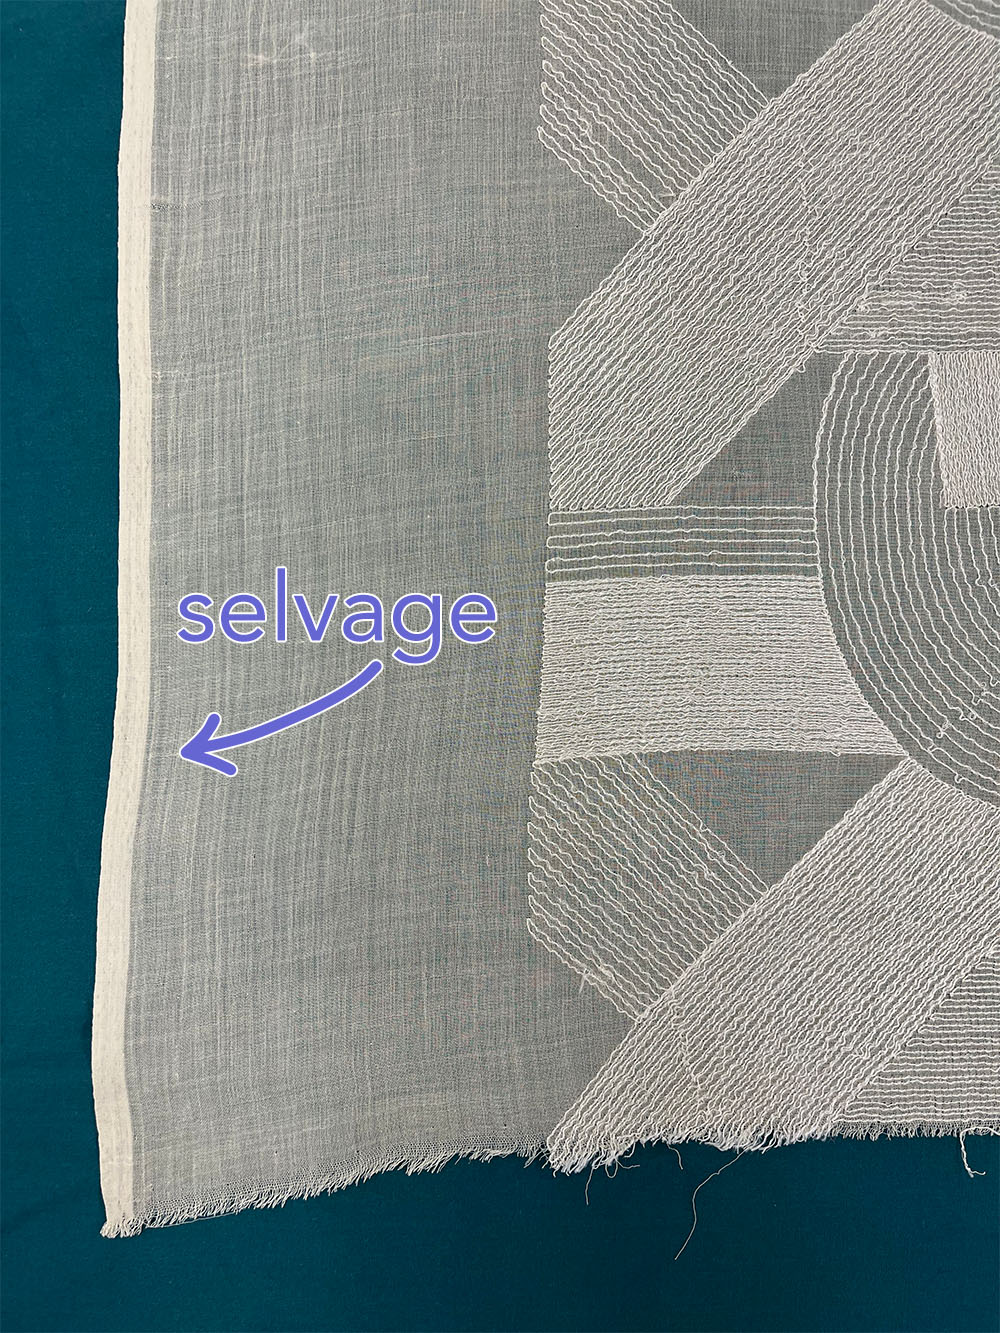 Close-up of a light-colored fabric with a geometric pattern including rectangles & semicircles. The thicker selvage and the ragged, raw edge are both visible.